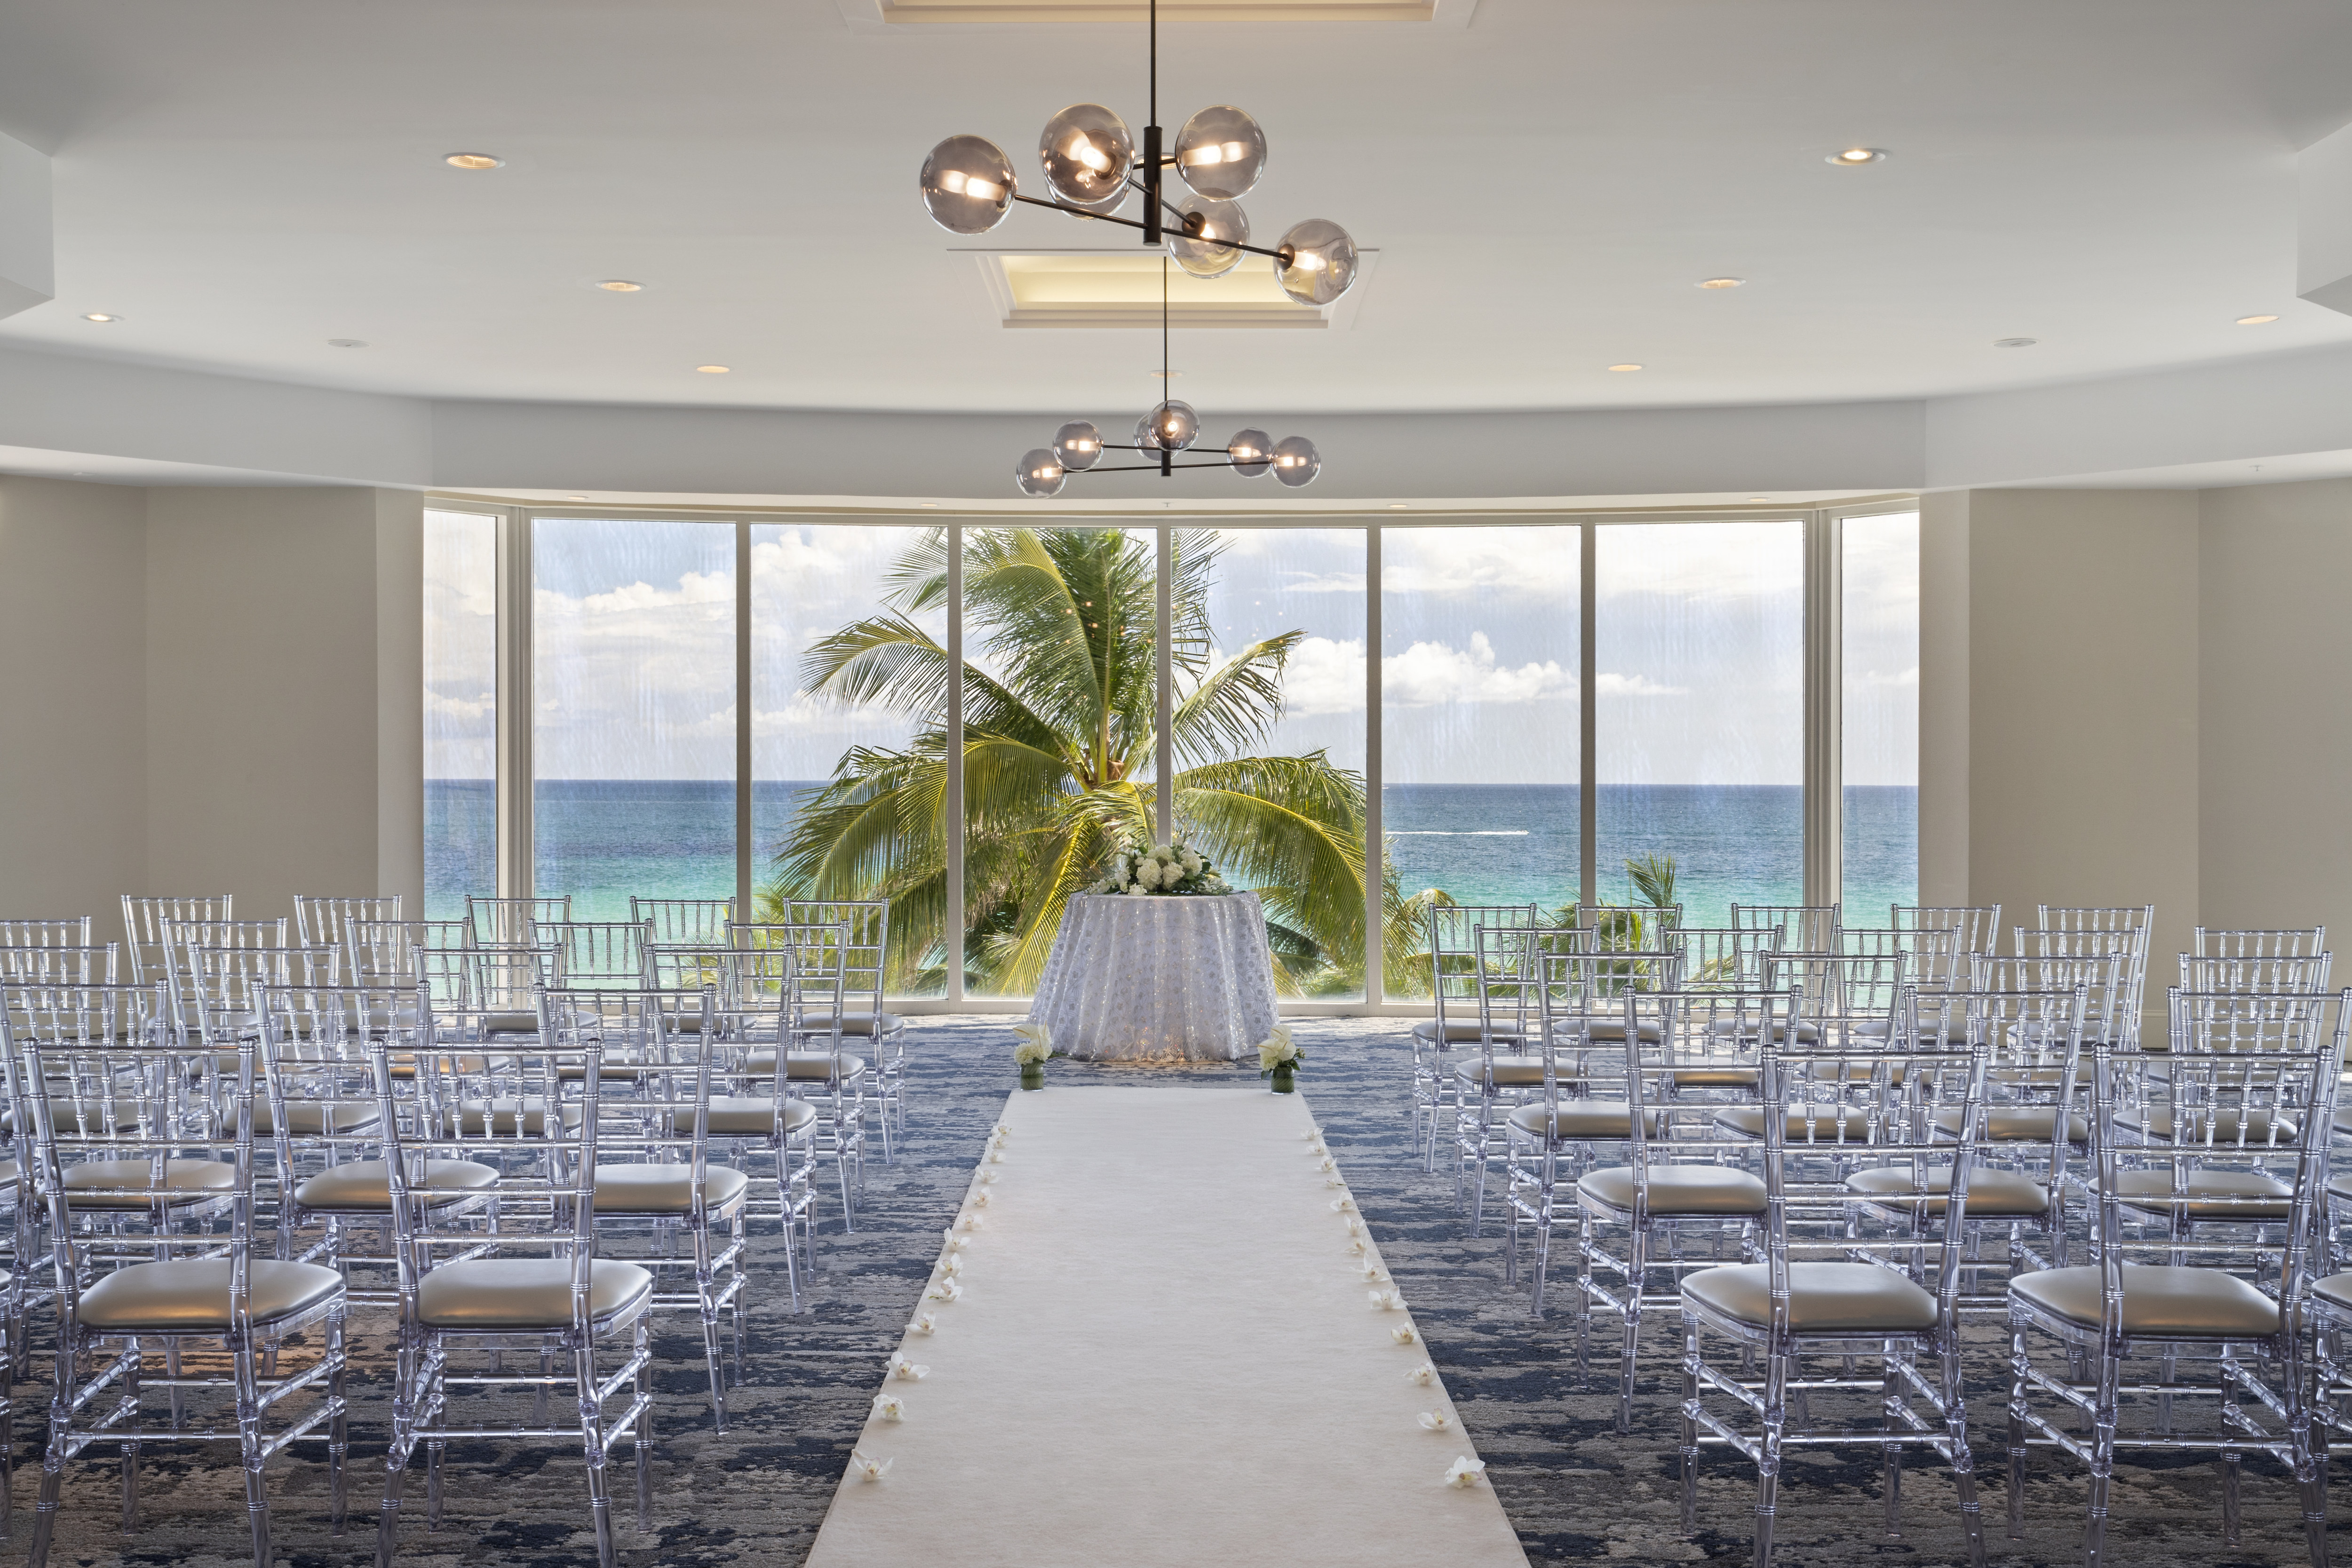 Meeting Room with Sea View Setup for a Wedding